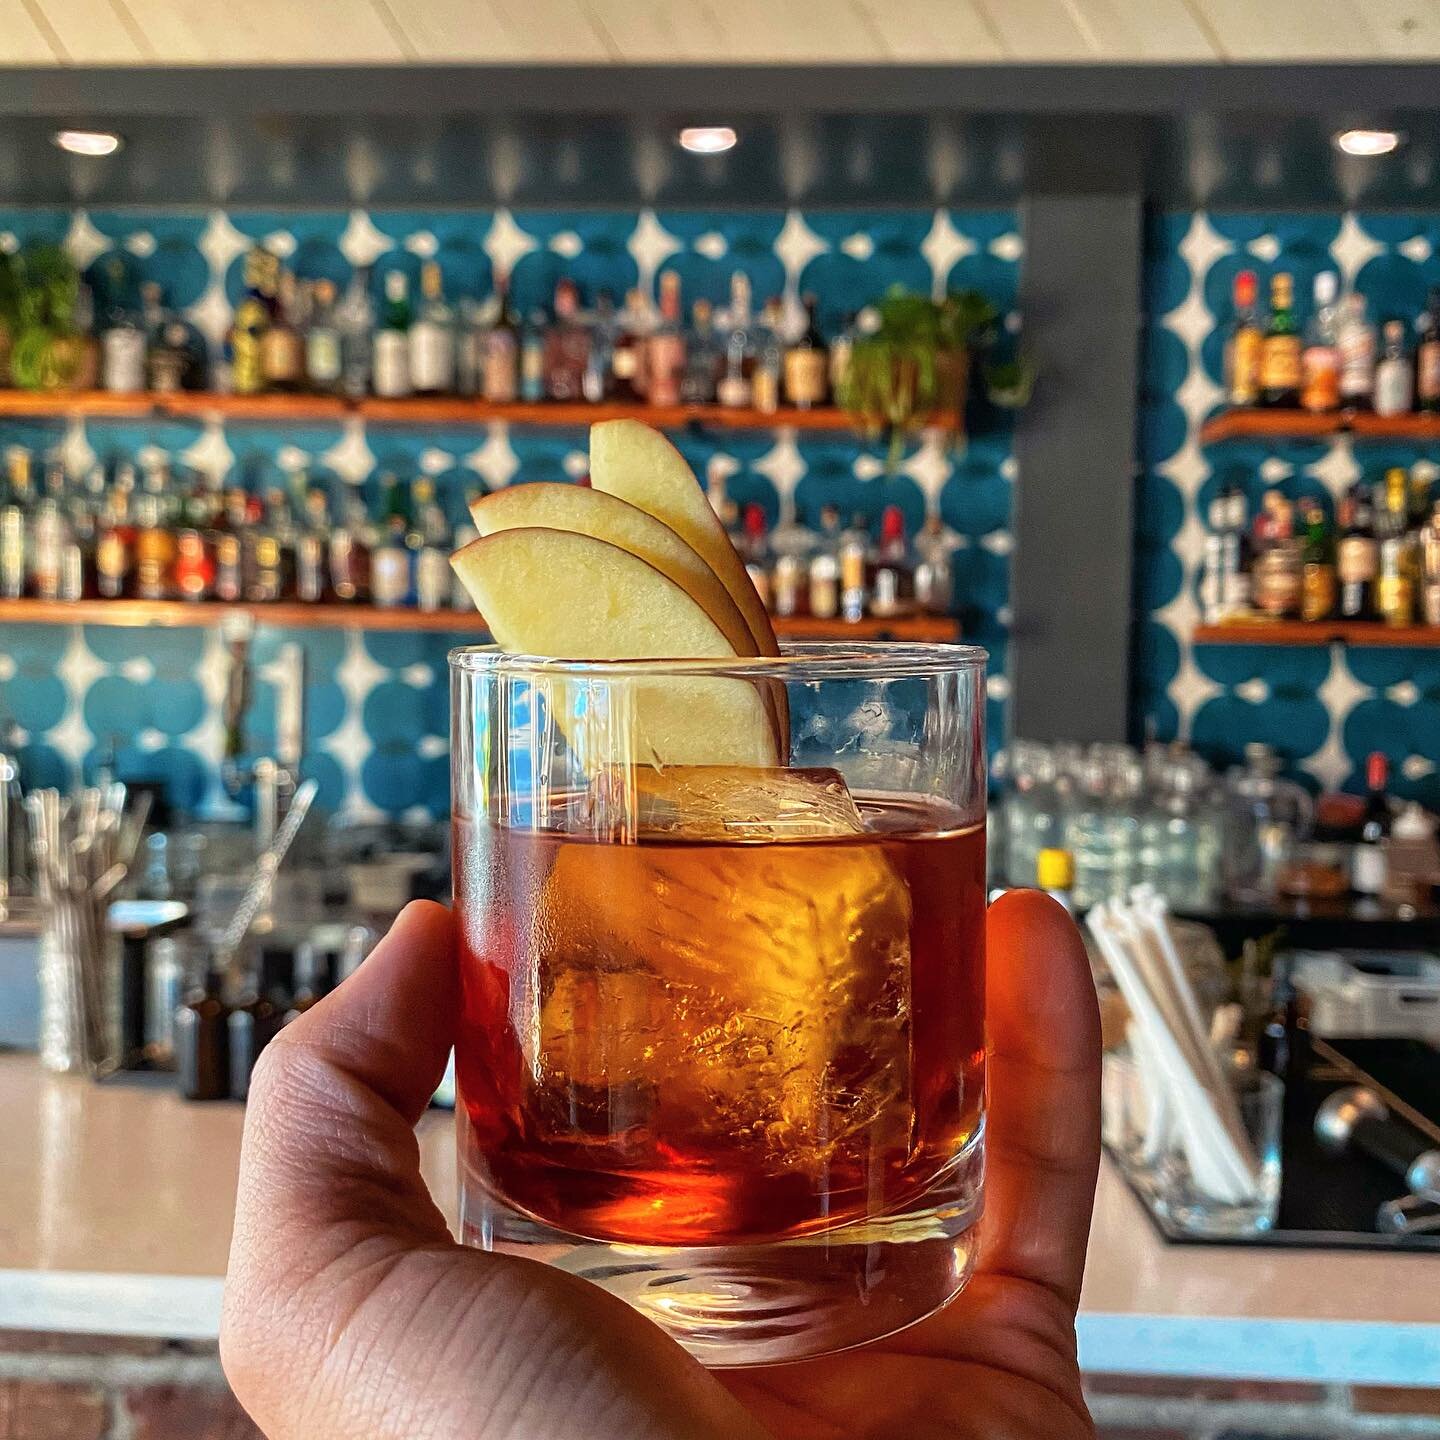 ‼️Brown Butter Spiced Old Fashioned🚨 is back! Definitely one of the most requested cocktails. Brown butter 🧈 washed rye, cinnamon, clove, allspice, walnut &amp; apple. Cozy and festive all around 🦦